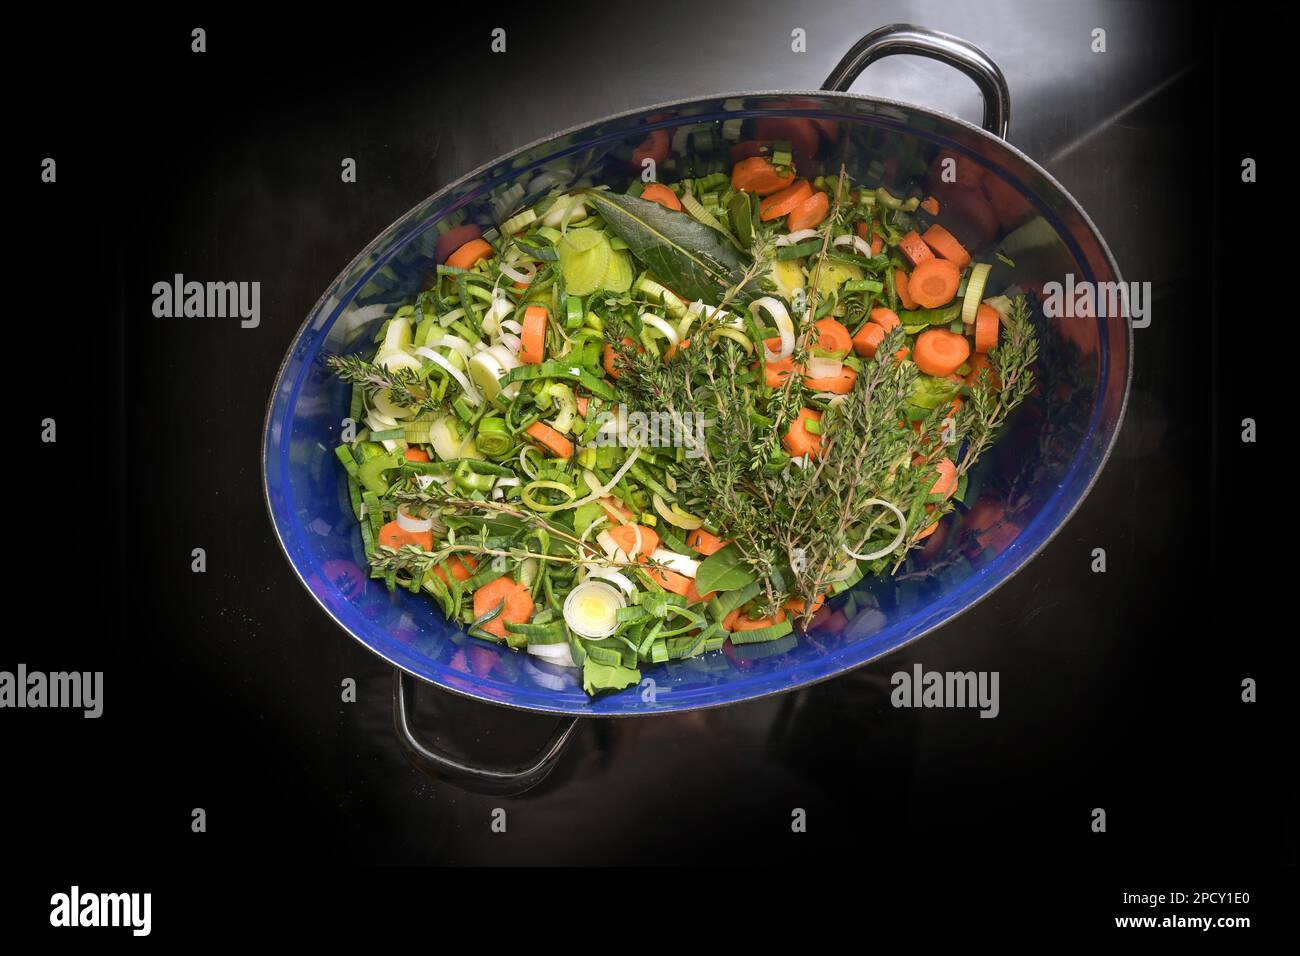 Chopped raw vegetables like carrots, celery and leek with herbs like thyme and bay leaves in a dark blue roaster on the black induction stove top, for Stock Photo